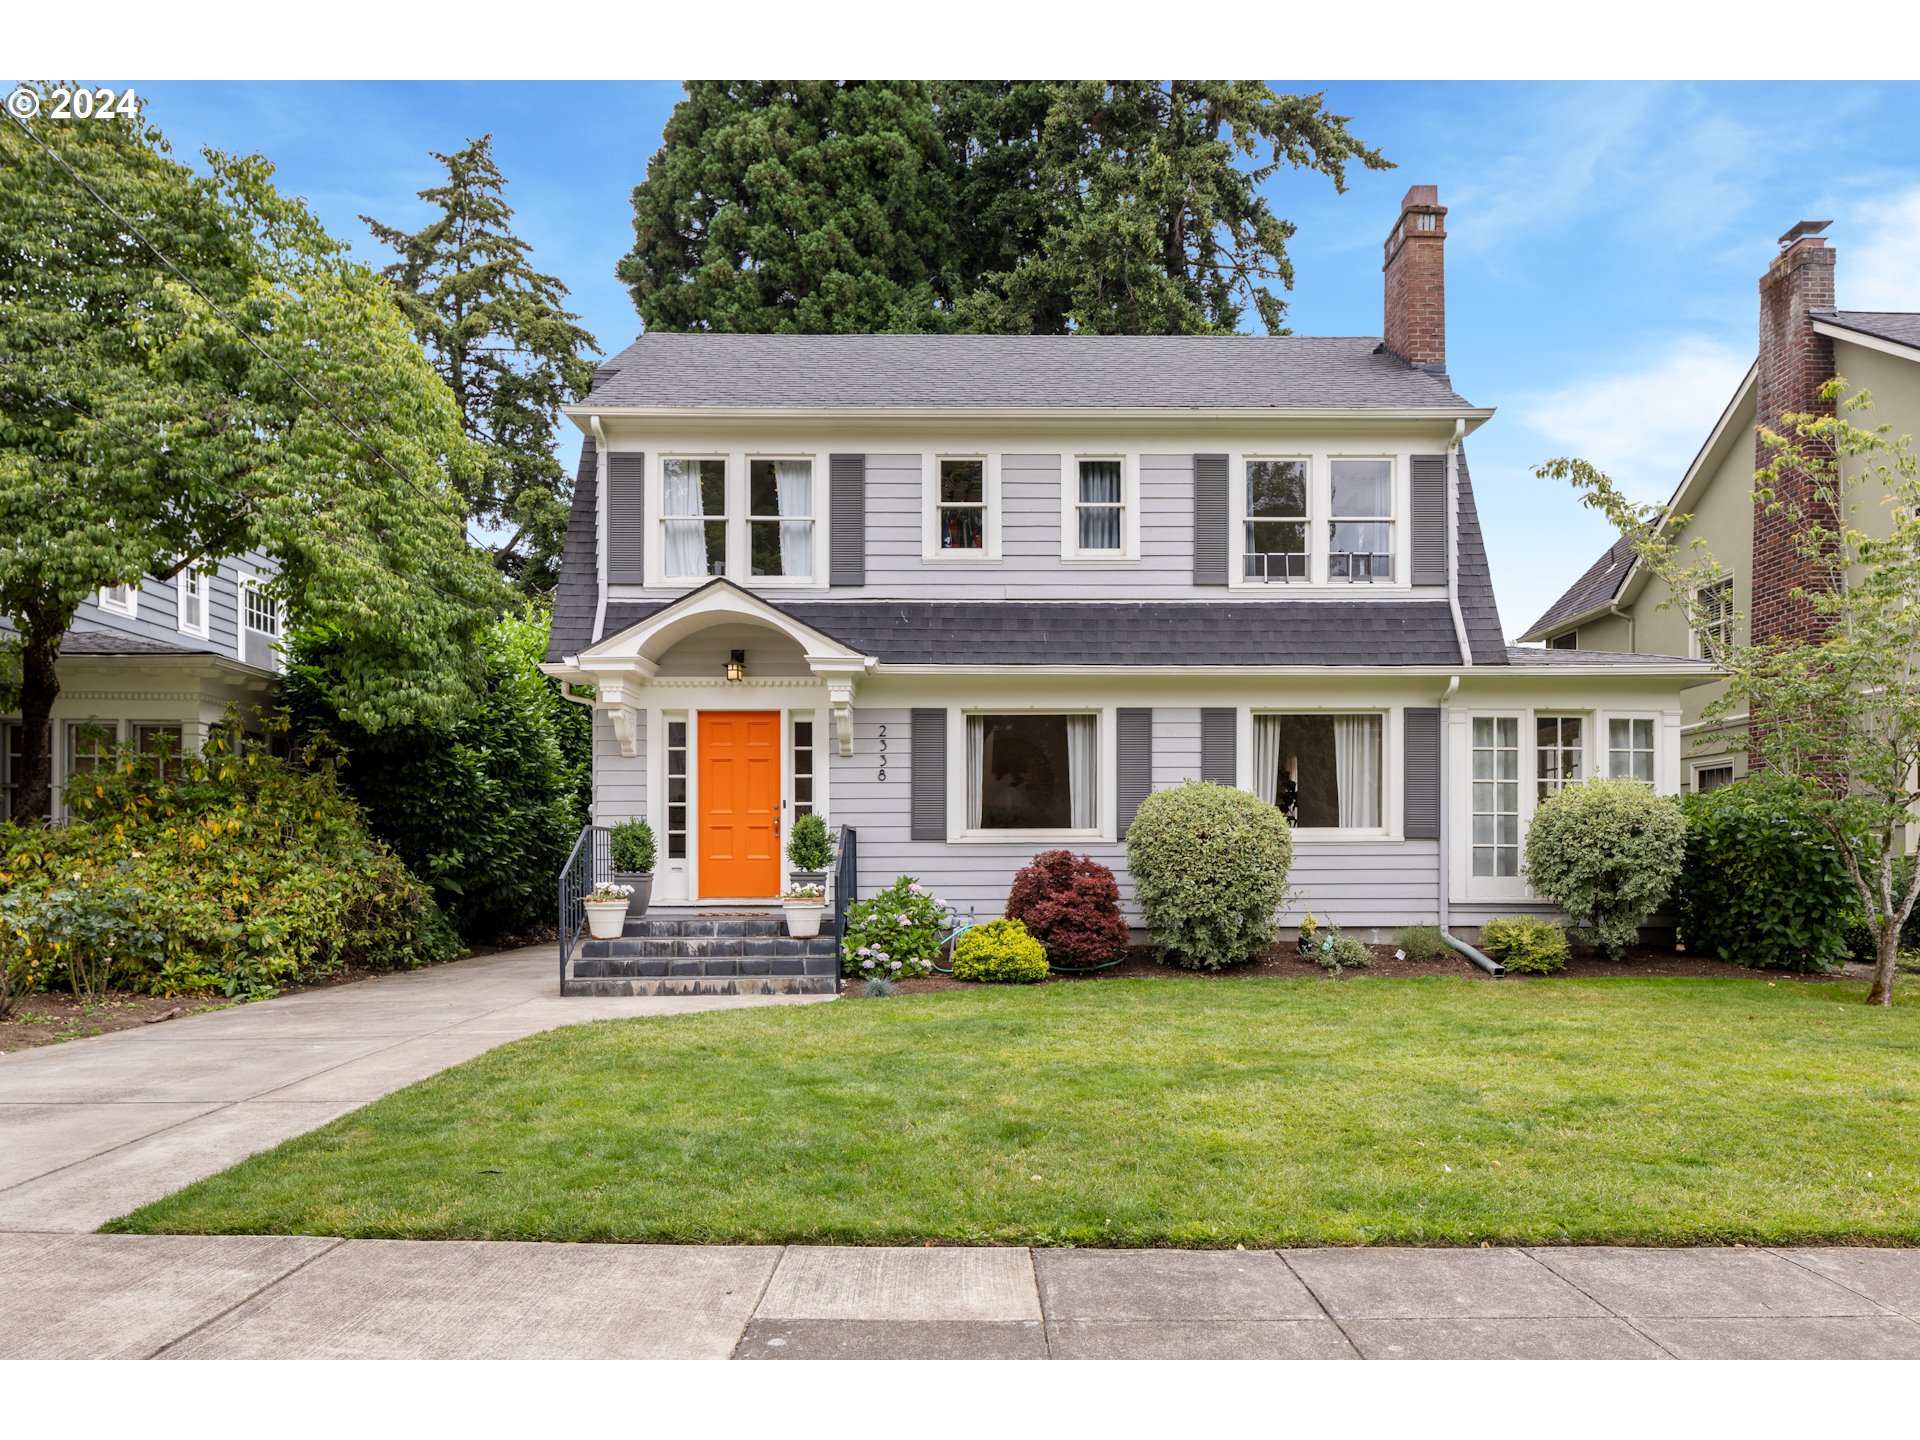 Welcome to your dream home in the coveted Dolph Park neighborhood of NE Portland. This stunning 1926 Dutch Colonial is a true gem, boasting a rare oversized lot (7,150 sqft) that provides ample space and privacy. Step inside and be greeted by the timeless beauty of refinished hardwood floors that flow seamlessly throughout the entire home. With 3 bedrooms and 2 baths, this residence offers comfort and functionality for everyday living. The finished basement of this home has been thoughtfully designed to cater to your needs. Currently set up as a family room and guest suite with a full bath and separate entrance, it presents an incredible opportunity for a potential accessory dwelling unit (ADU). Whether you desire a private space for guests, a home office, or a rental opportunity, this versatile area offers endless possibilities. The kitchen boasts stainless appliances, gas cooking, a farmhouse-style sink, and quartz counters. A cozy nook off the kitchen with leaded glass built-ins adds a touch of elegance and charm. The living room is the heart of this home, boasting an art deco inspired fireplace and large picture windows that fill the space with natural light. Adjacent to the living room is a light-filled sunroom, creating a serene retreat where you can work, reflect, or immerse yourself in a good book. Step outside and discover a large backyard and patio, perfect for hosting memorable dinners and entertaining guests. Whether you envision weekend barbecues or simply enjoying the fresh air, this outdoor oasis is sure to impress. Don't miss the opportunity to call this beautiful Dutch Colonial your own. Experience the charm of Dolph Park living and create a lifetime of cherished memories in this extraordinary home.